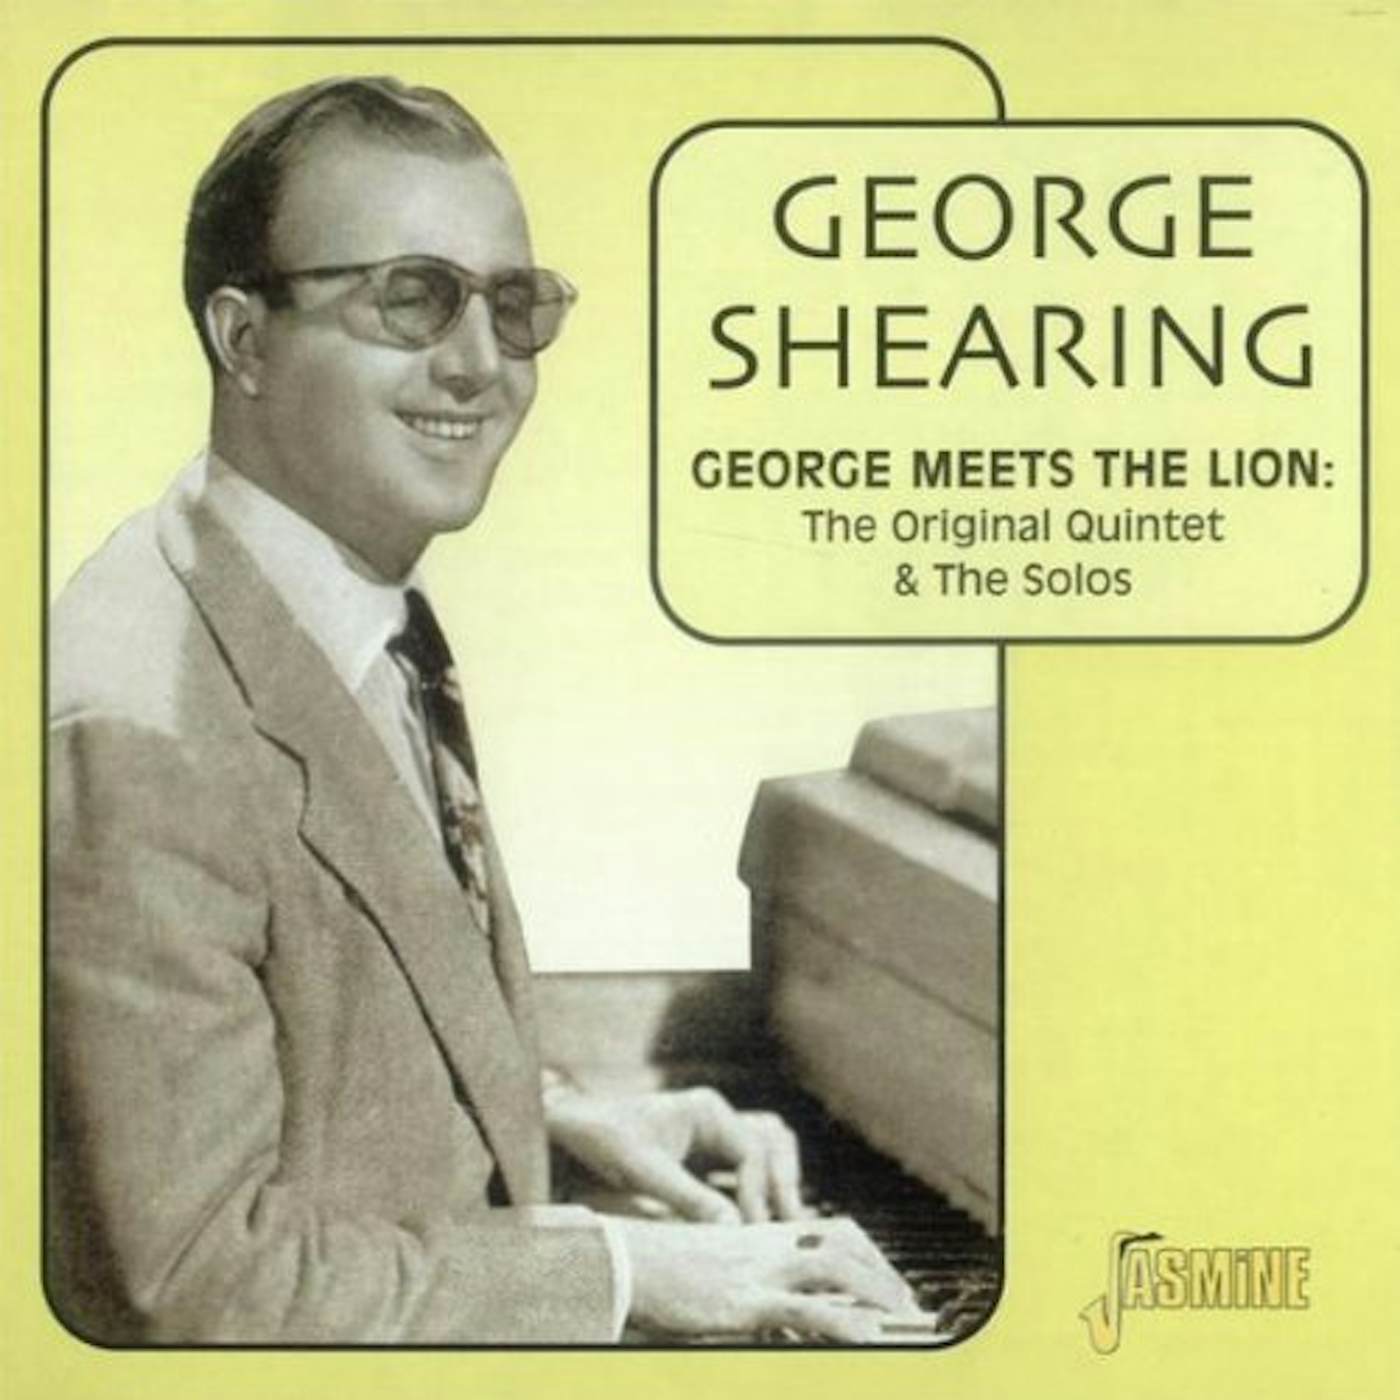 George Shearing GEORGE MEETS THE LION: ORIGINAL QUINTET & SOLOS CD